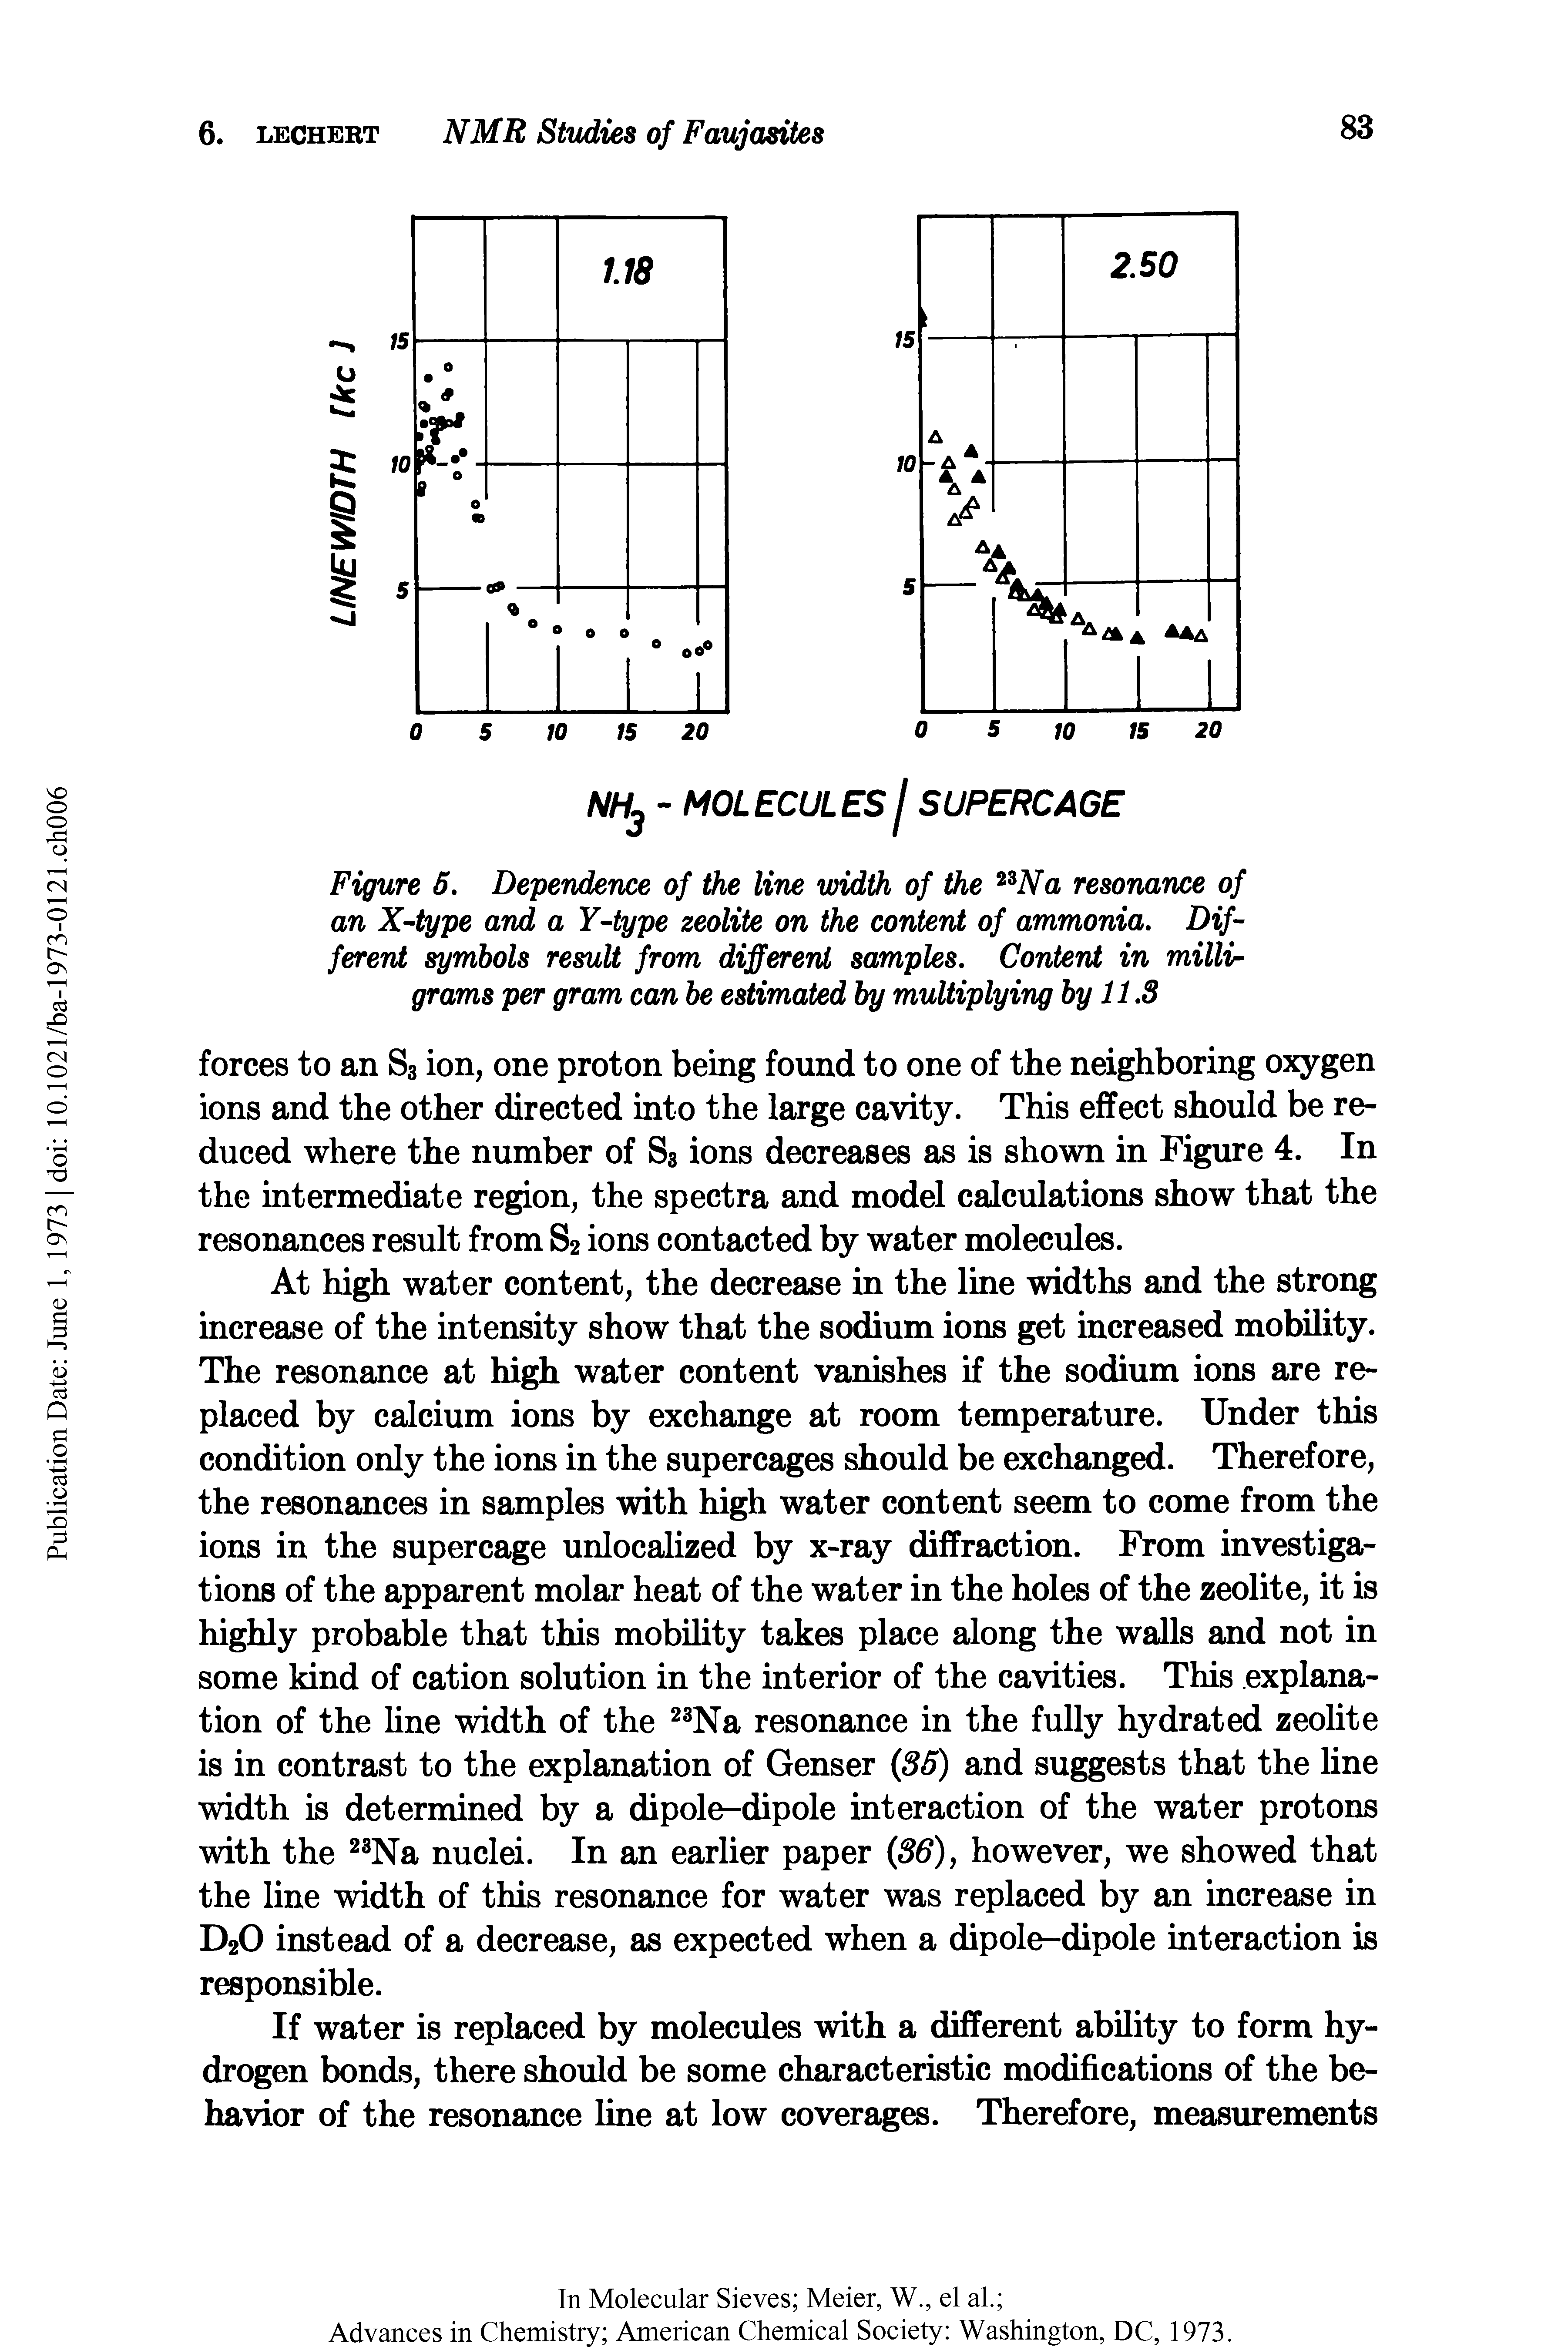 Figure 5. Dependence of the line width of the nNa resonance of an X-type and a Y-type zeolite on the content of ammonia. Different symbols result from different samples. Content in milligrams per gram can be estimated by multiplying by 11.3...